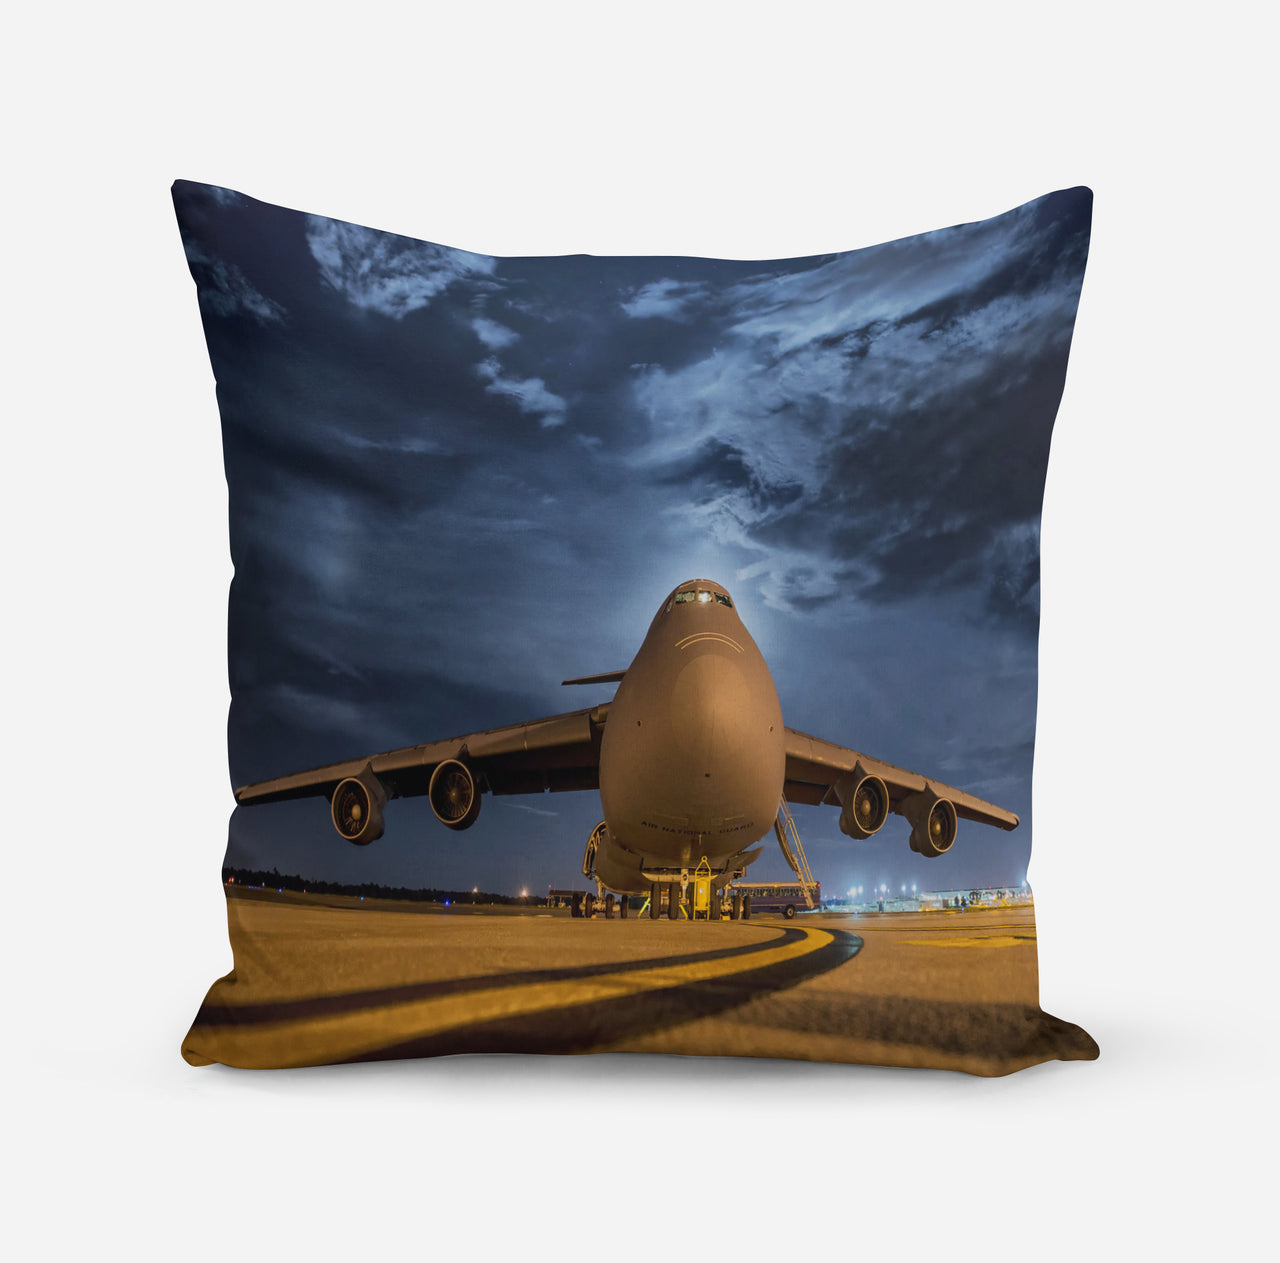 Amazing Military Aircraft at Night Designed Pillows